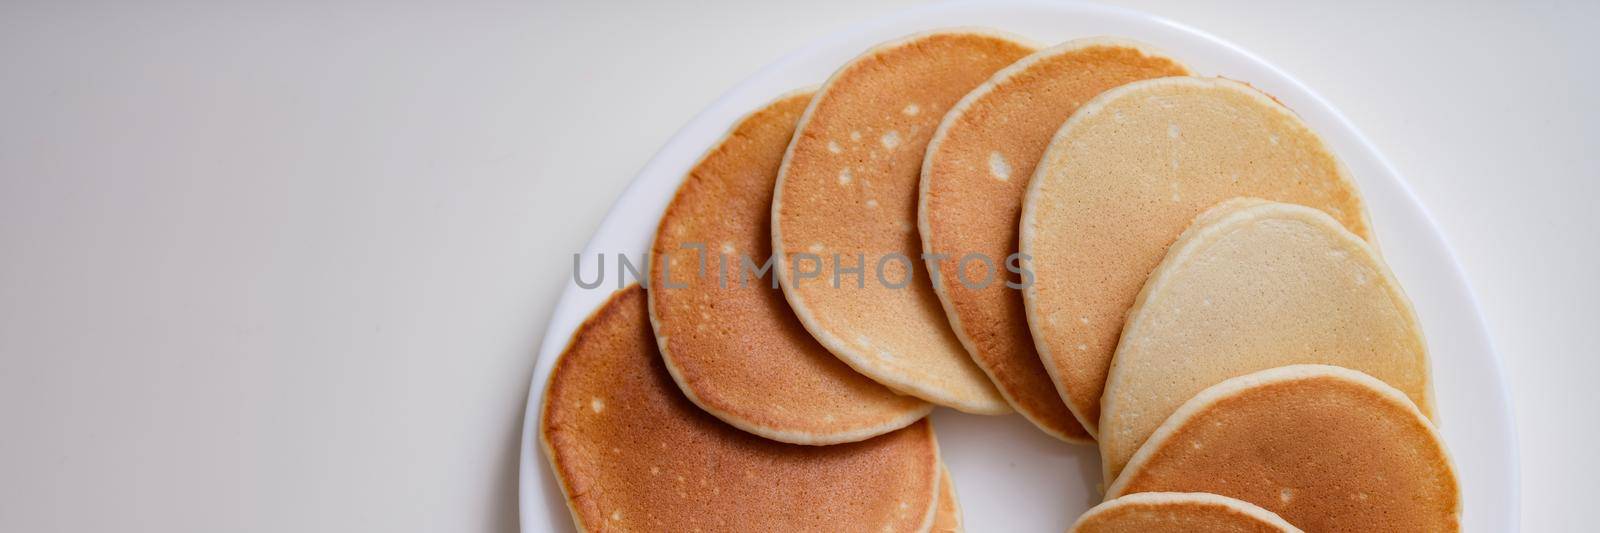 Lot of delicious appetizing pancakes lying on white plate in circle top view. Flour recipes concept